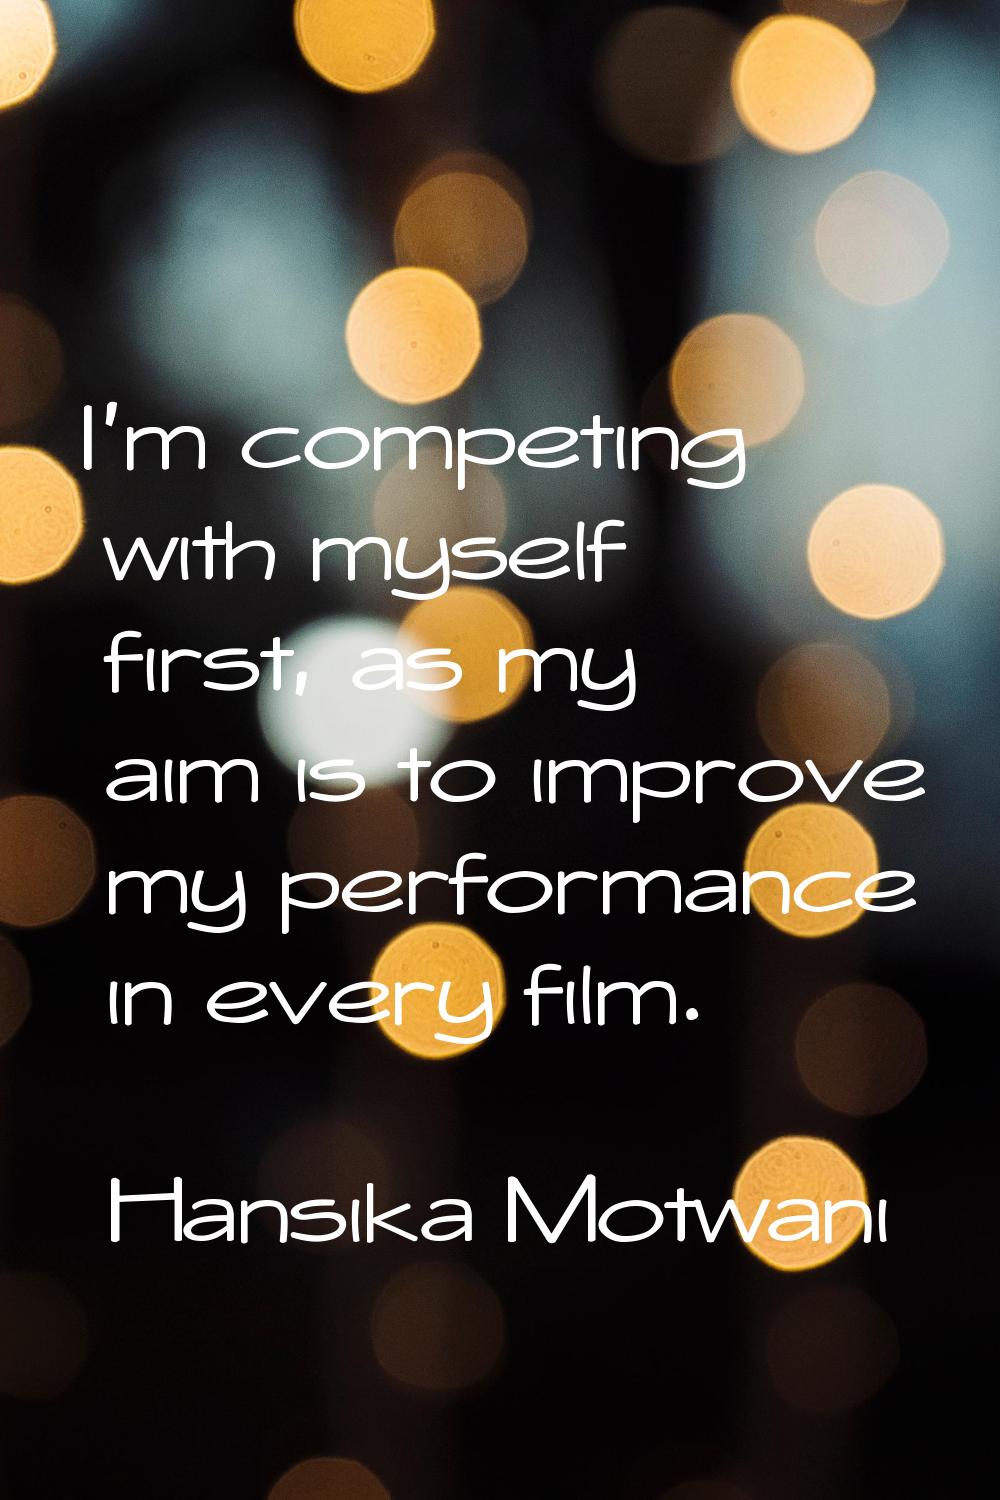 I'm competing with myself first, as my aim is to improve my performance in every film.